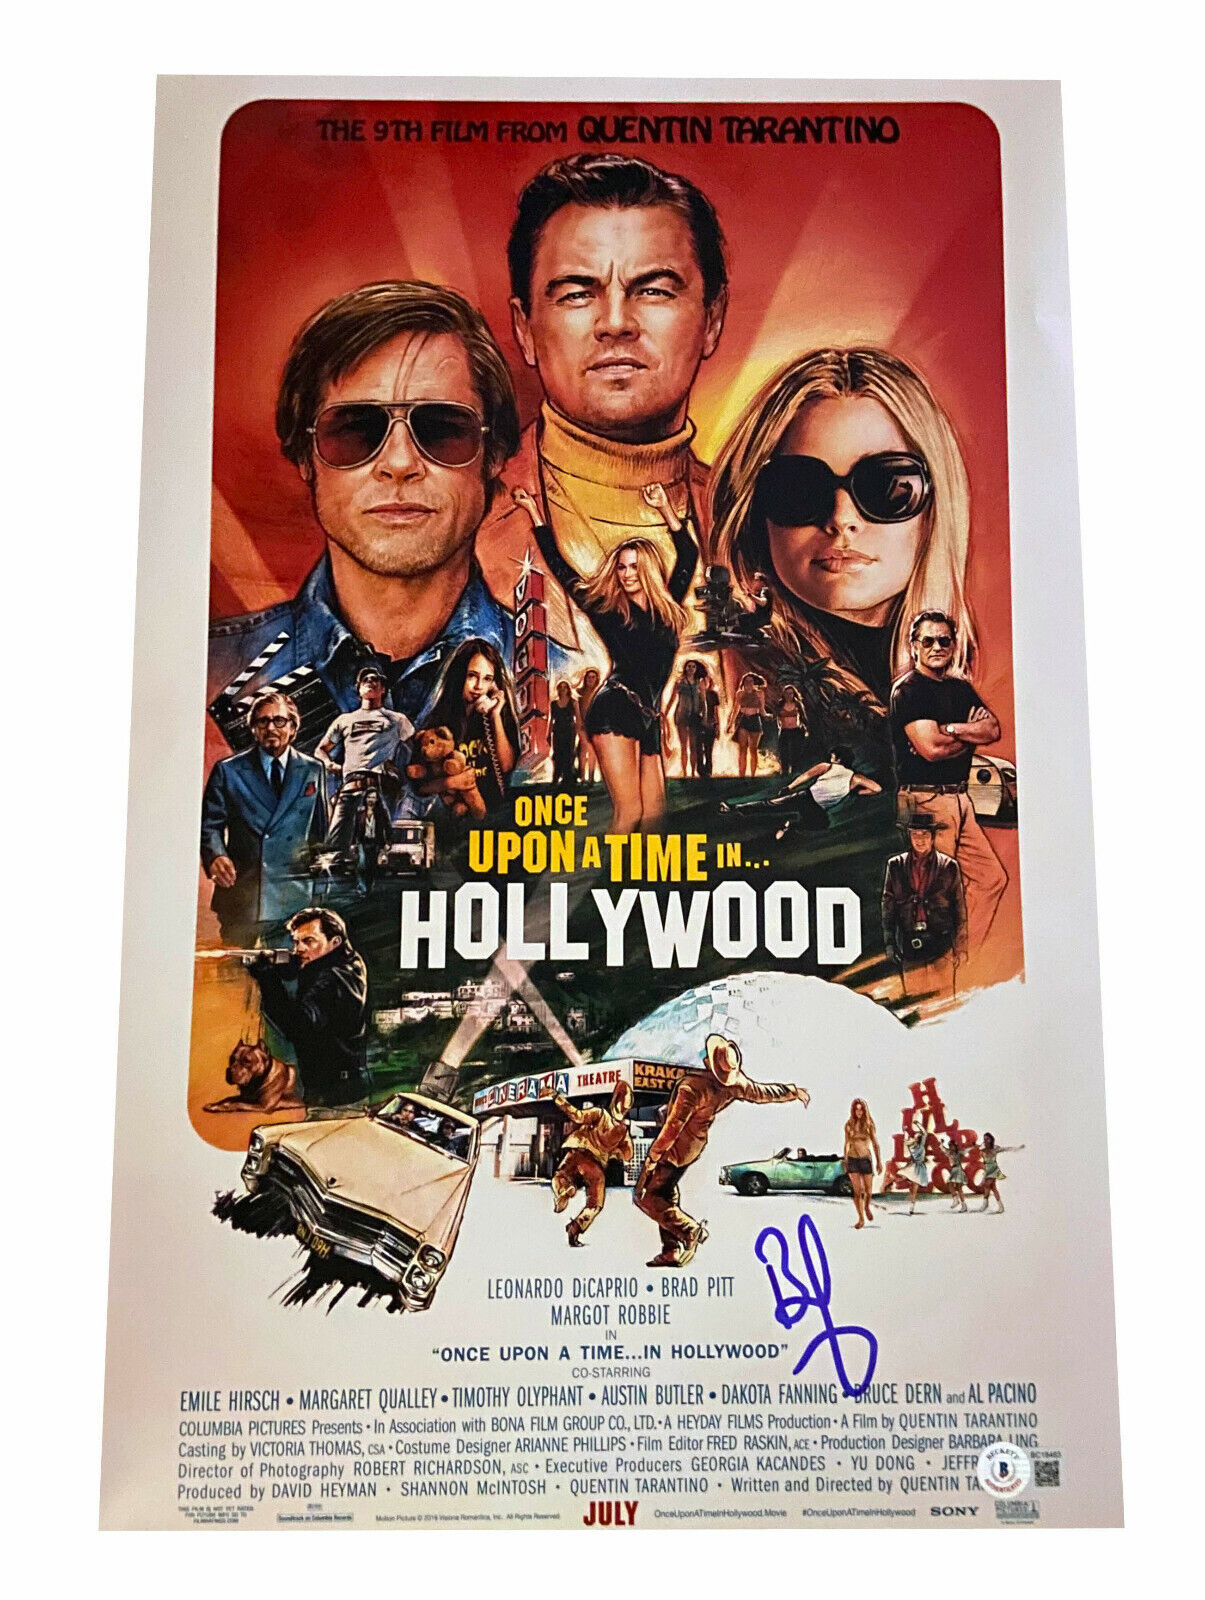 BRAD PITT SIGNED AUTOGRAPH 12X18 PHOTO ONCE UPON A TIME IN HOLLYWOOD BAS BECKETT